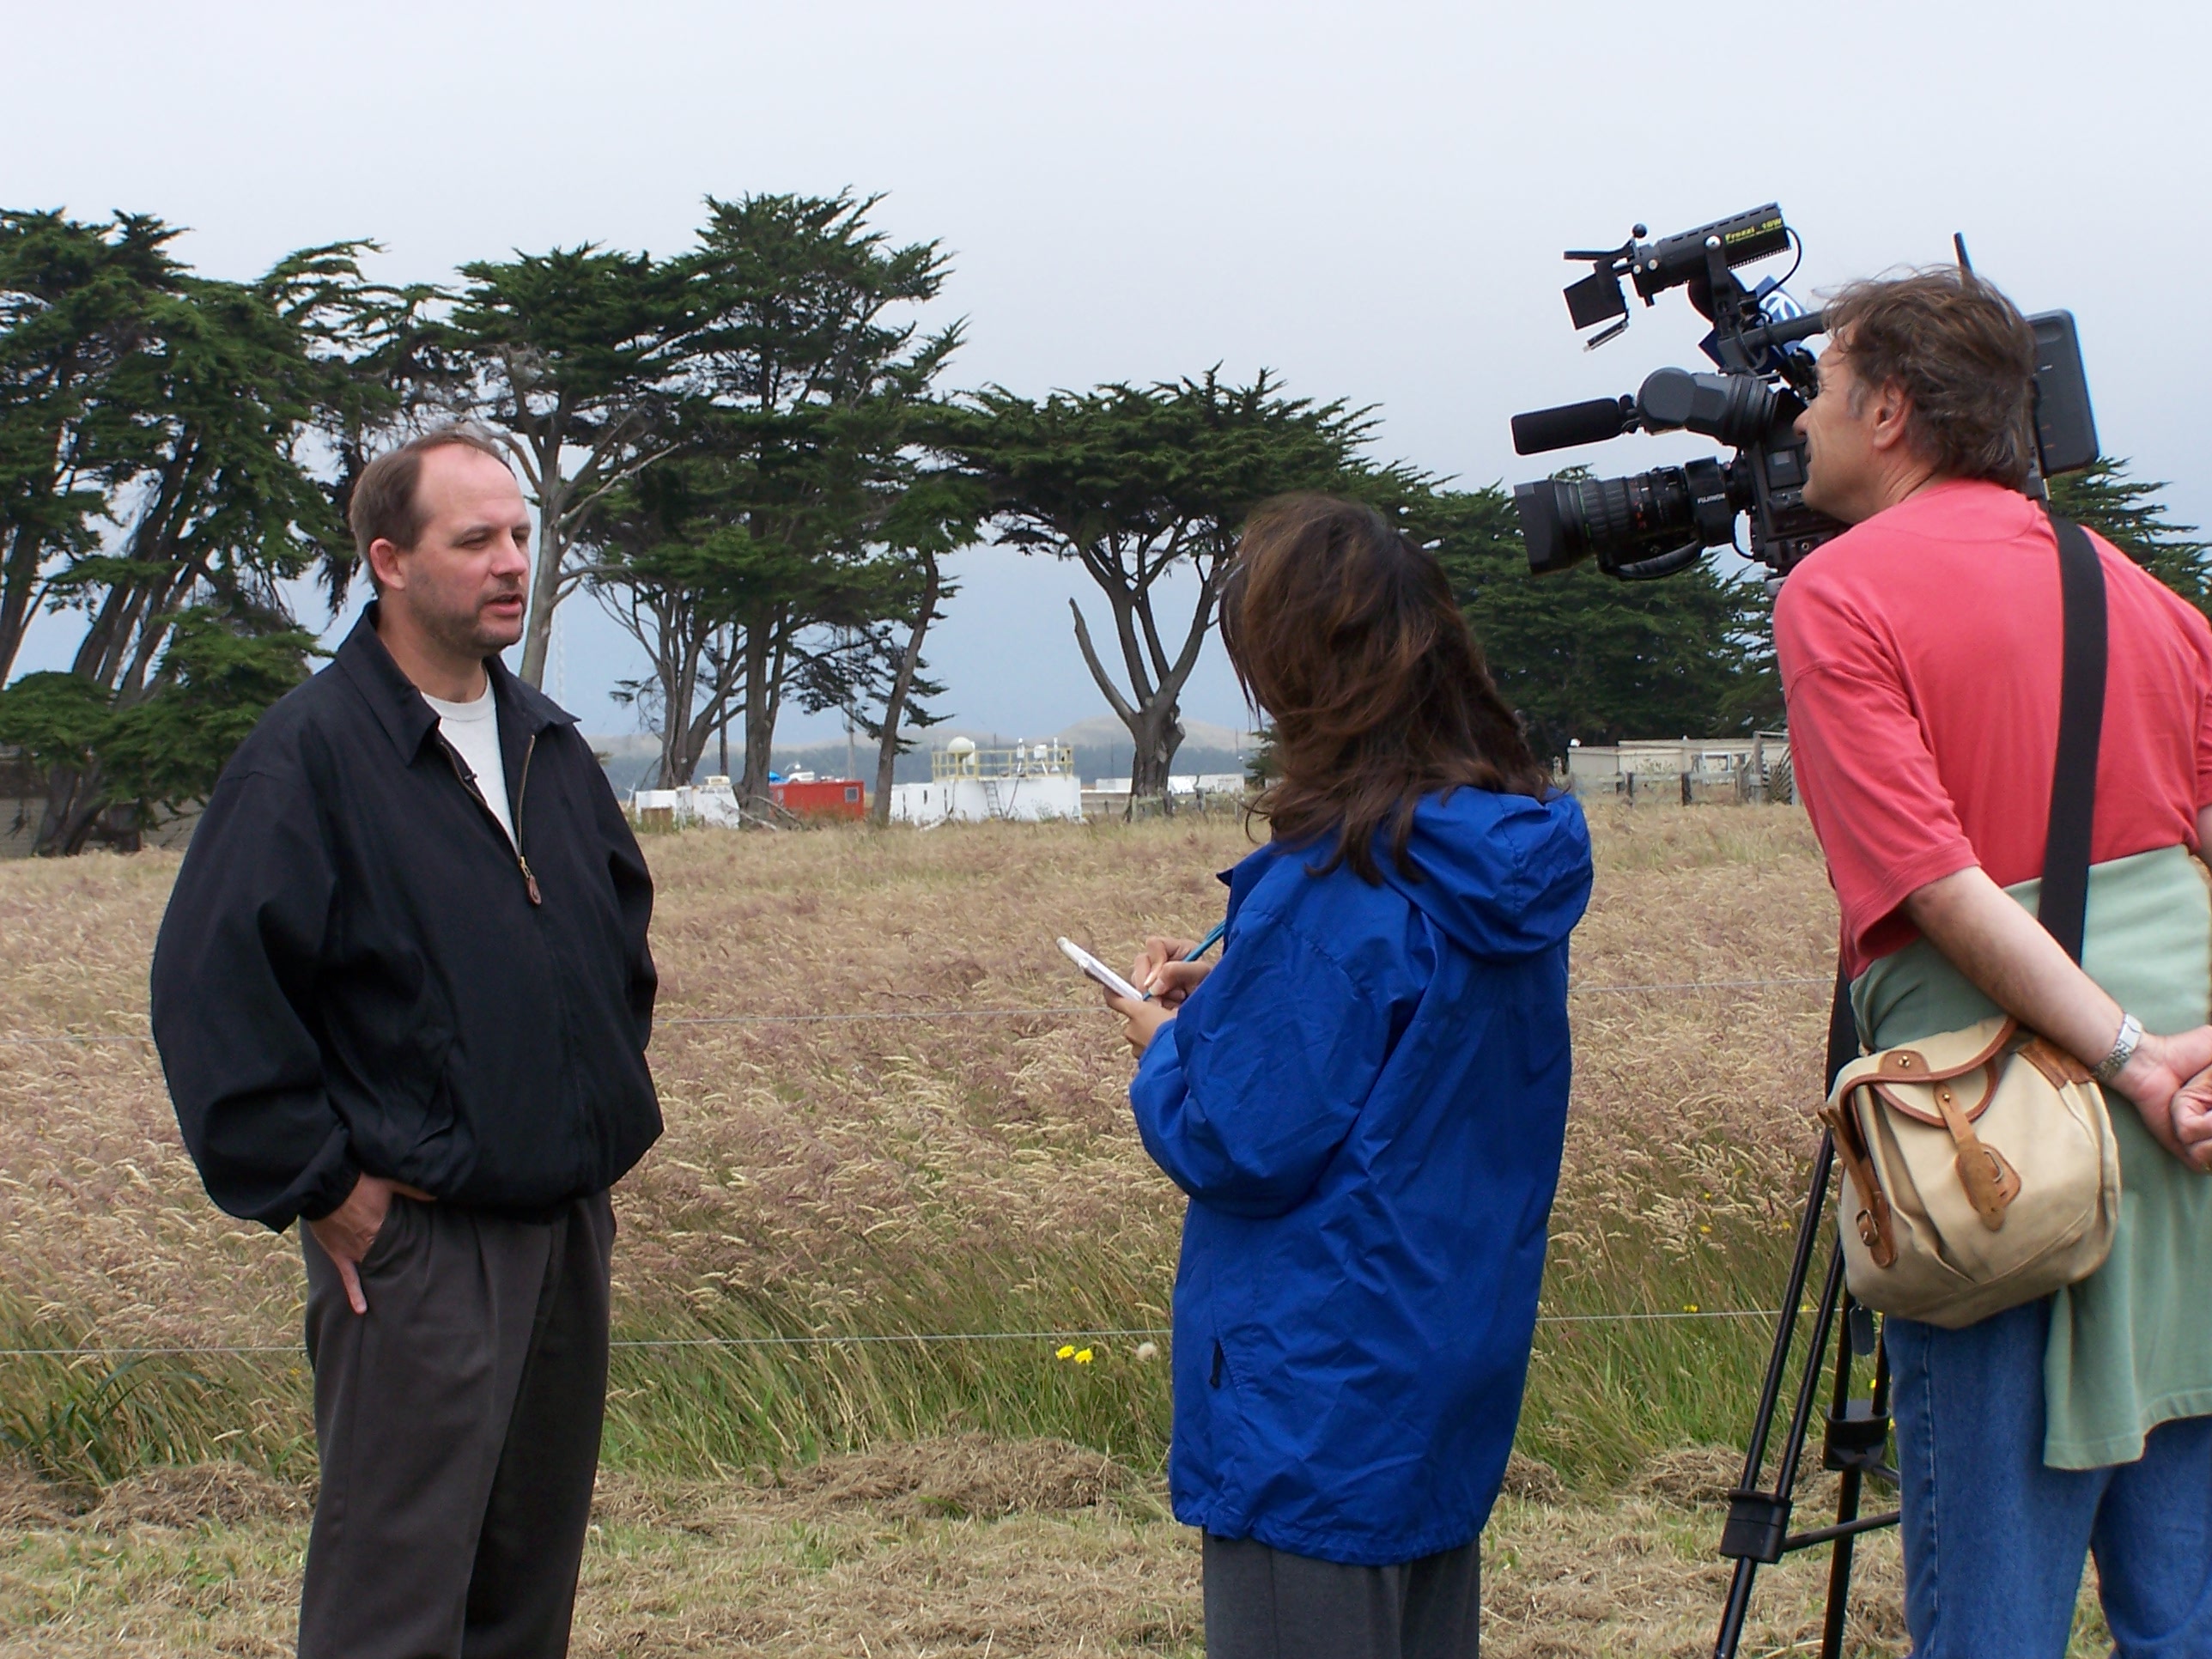 Mark Miller speaks to a TV reporter during MASRAD in Northern California